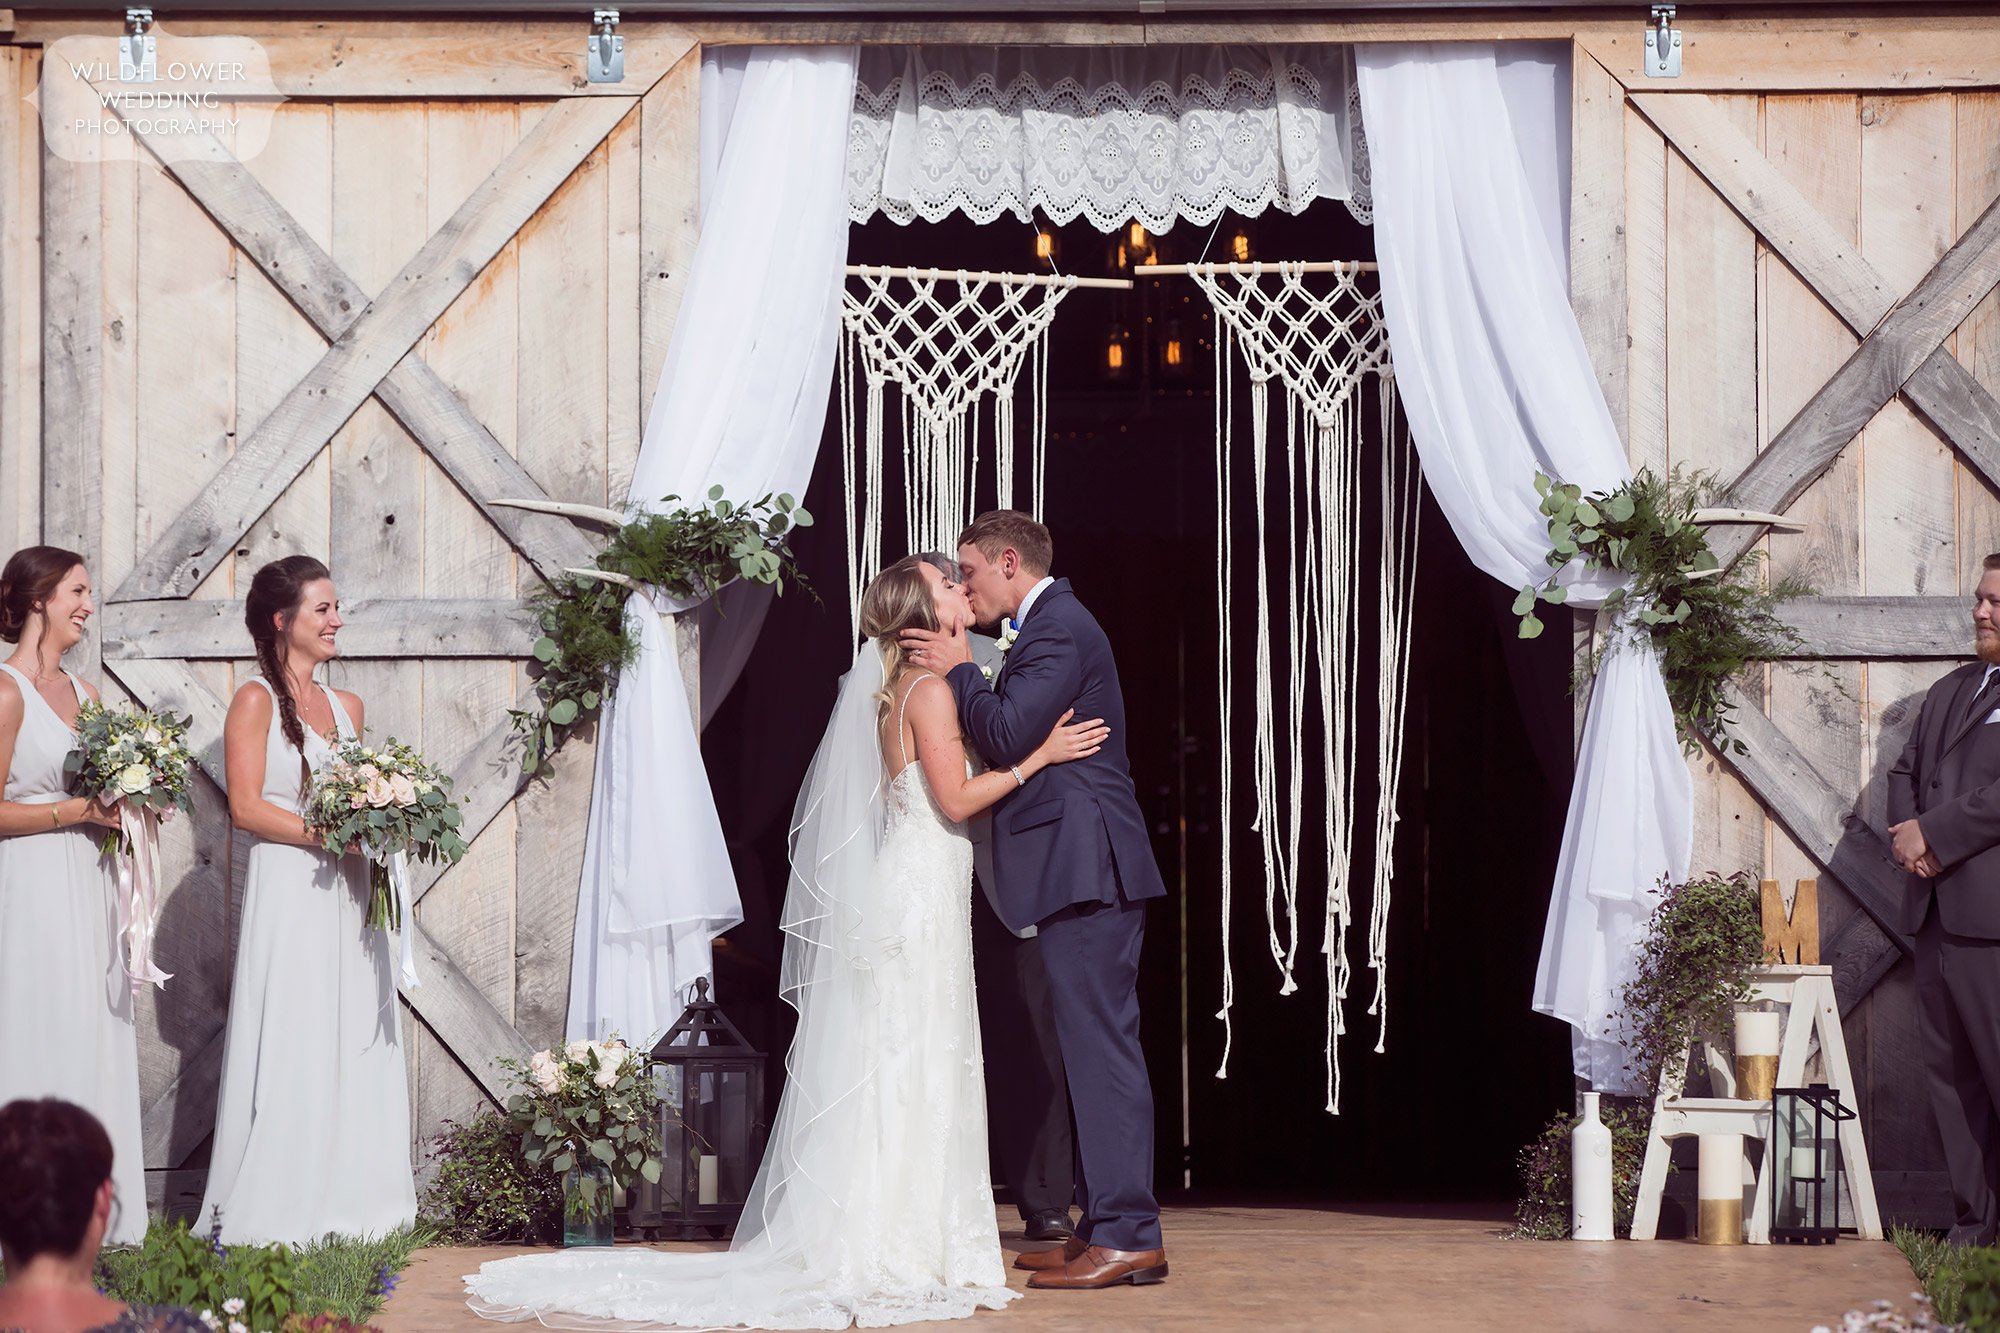 The bride and groom kiss in front of the crocheted macrame backdrop in the barn at Kempker's Back 40.